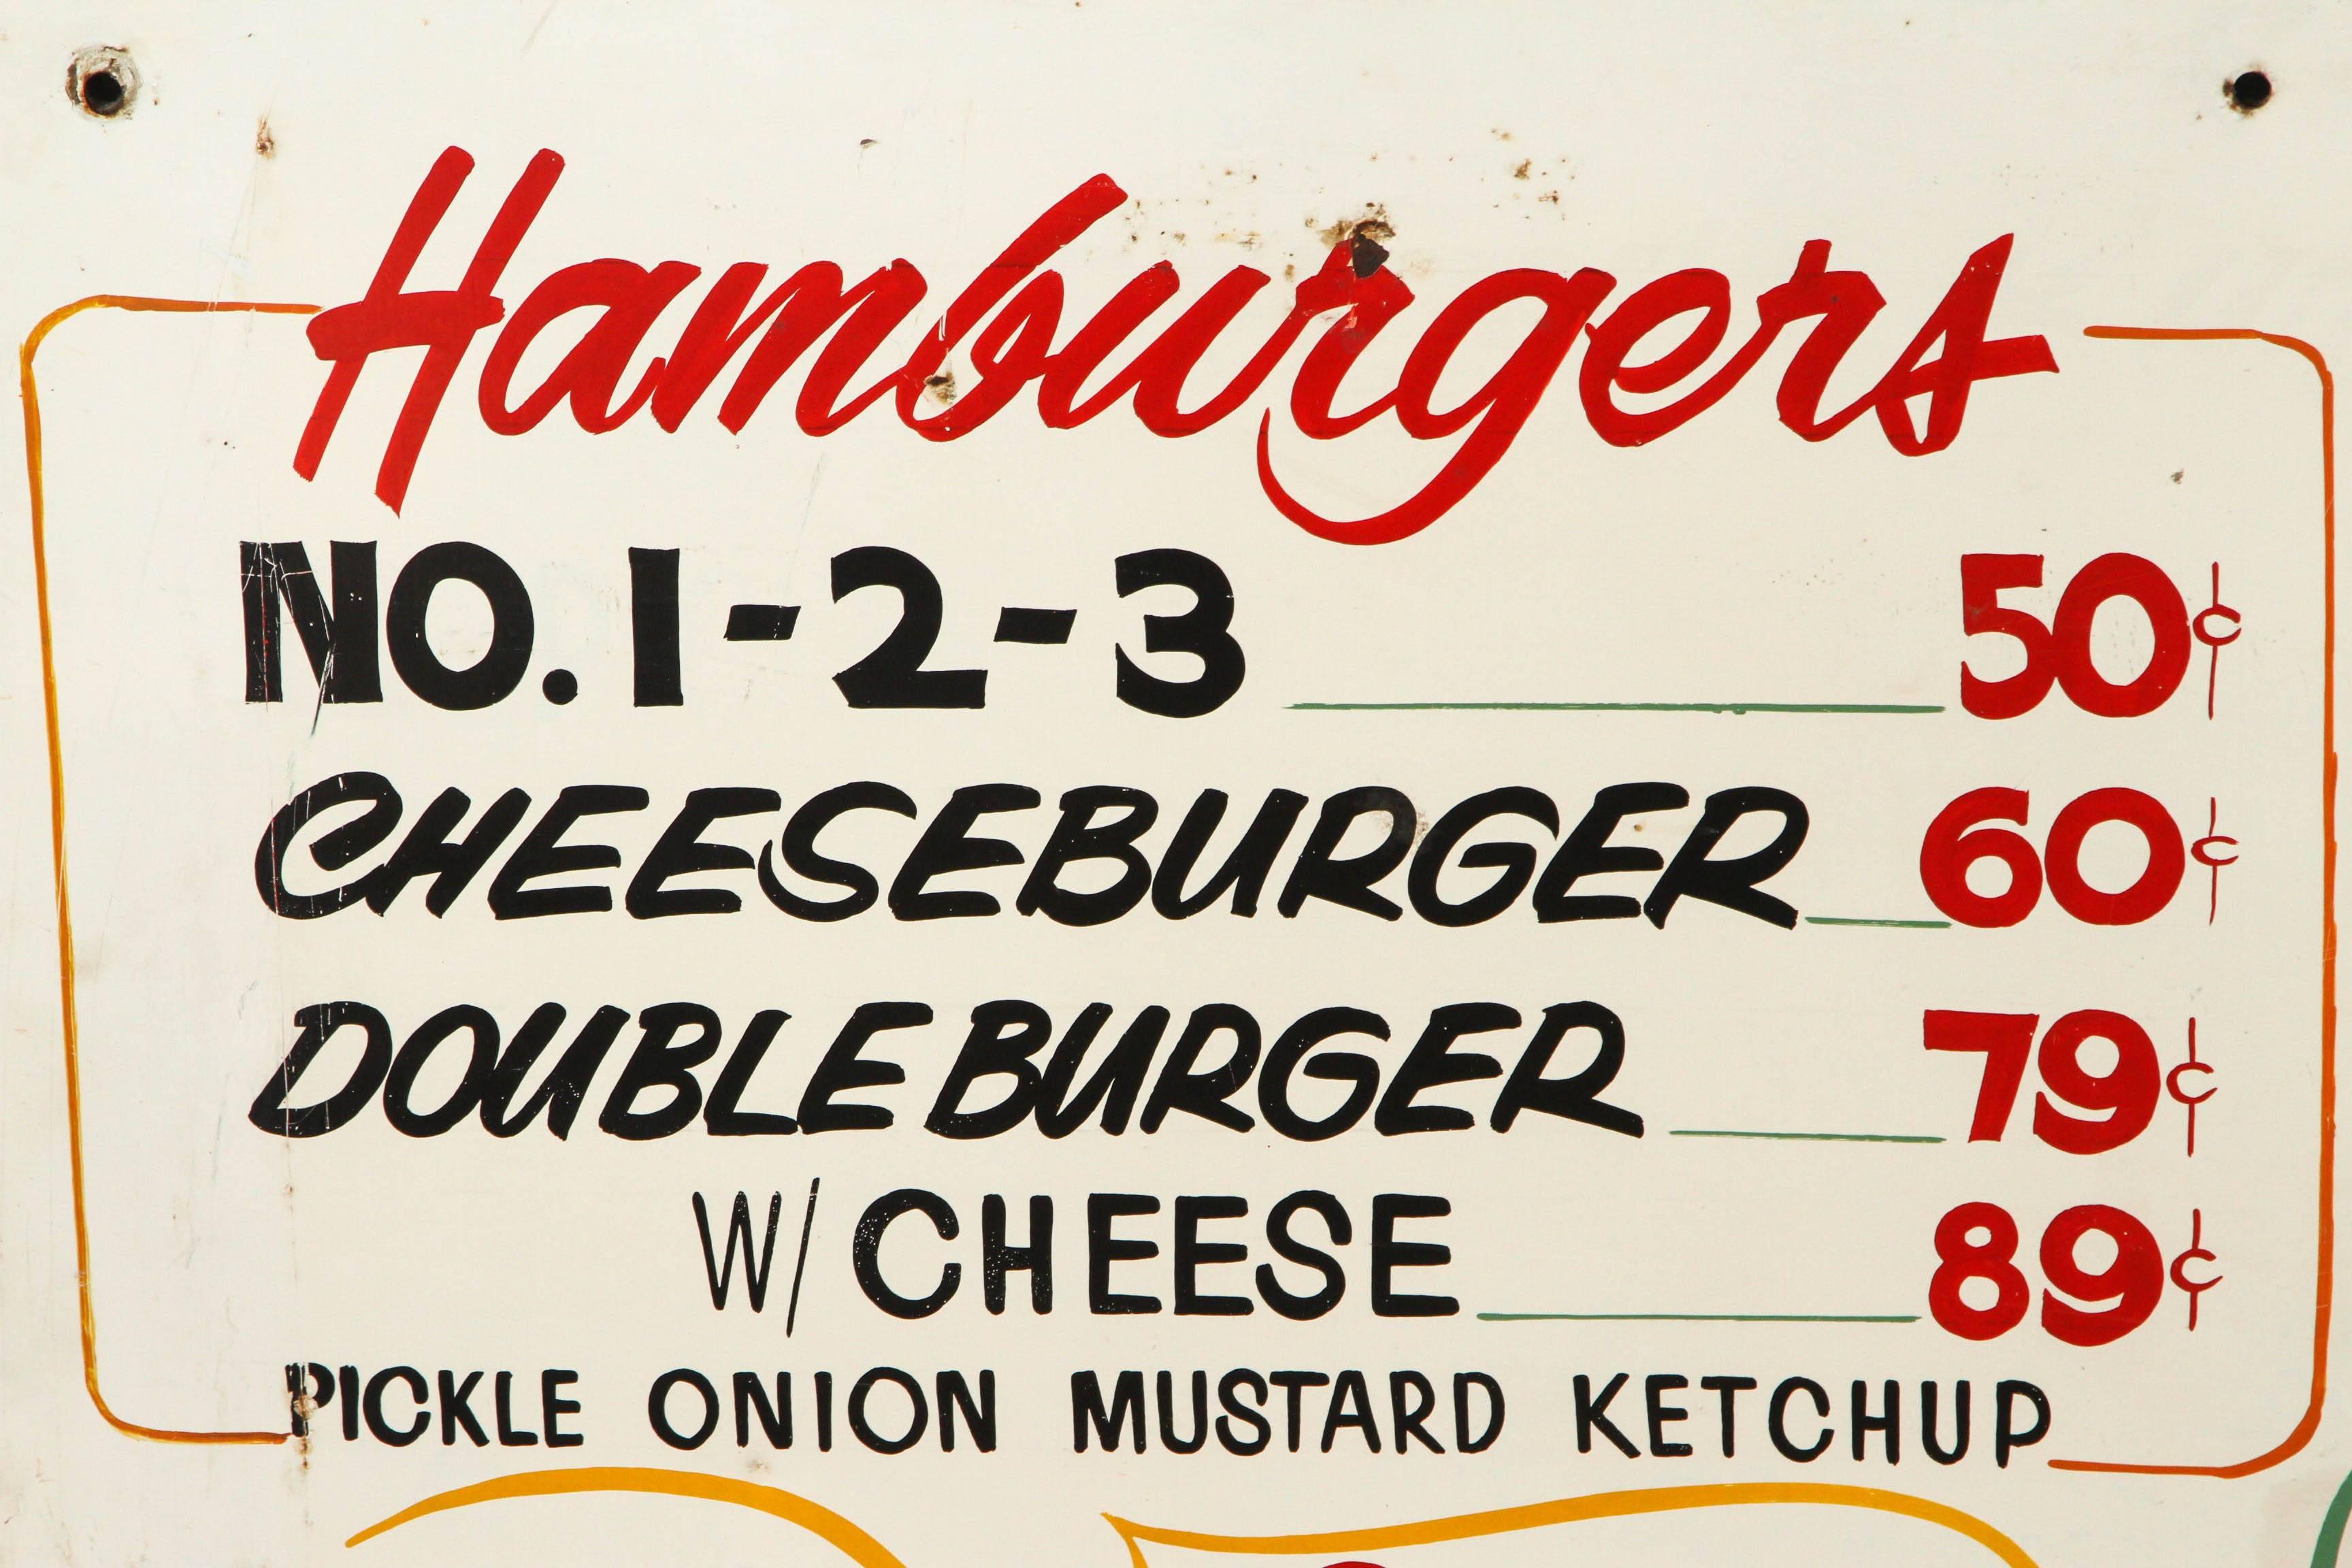 Home of the super burger, Sasquatch and Hot Shot! Graphic drive-in menu board found in the Pacific northwest. Metal sign with original wood frame attached to the back.